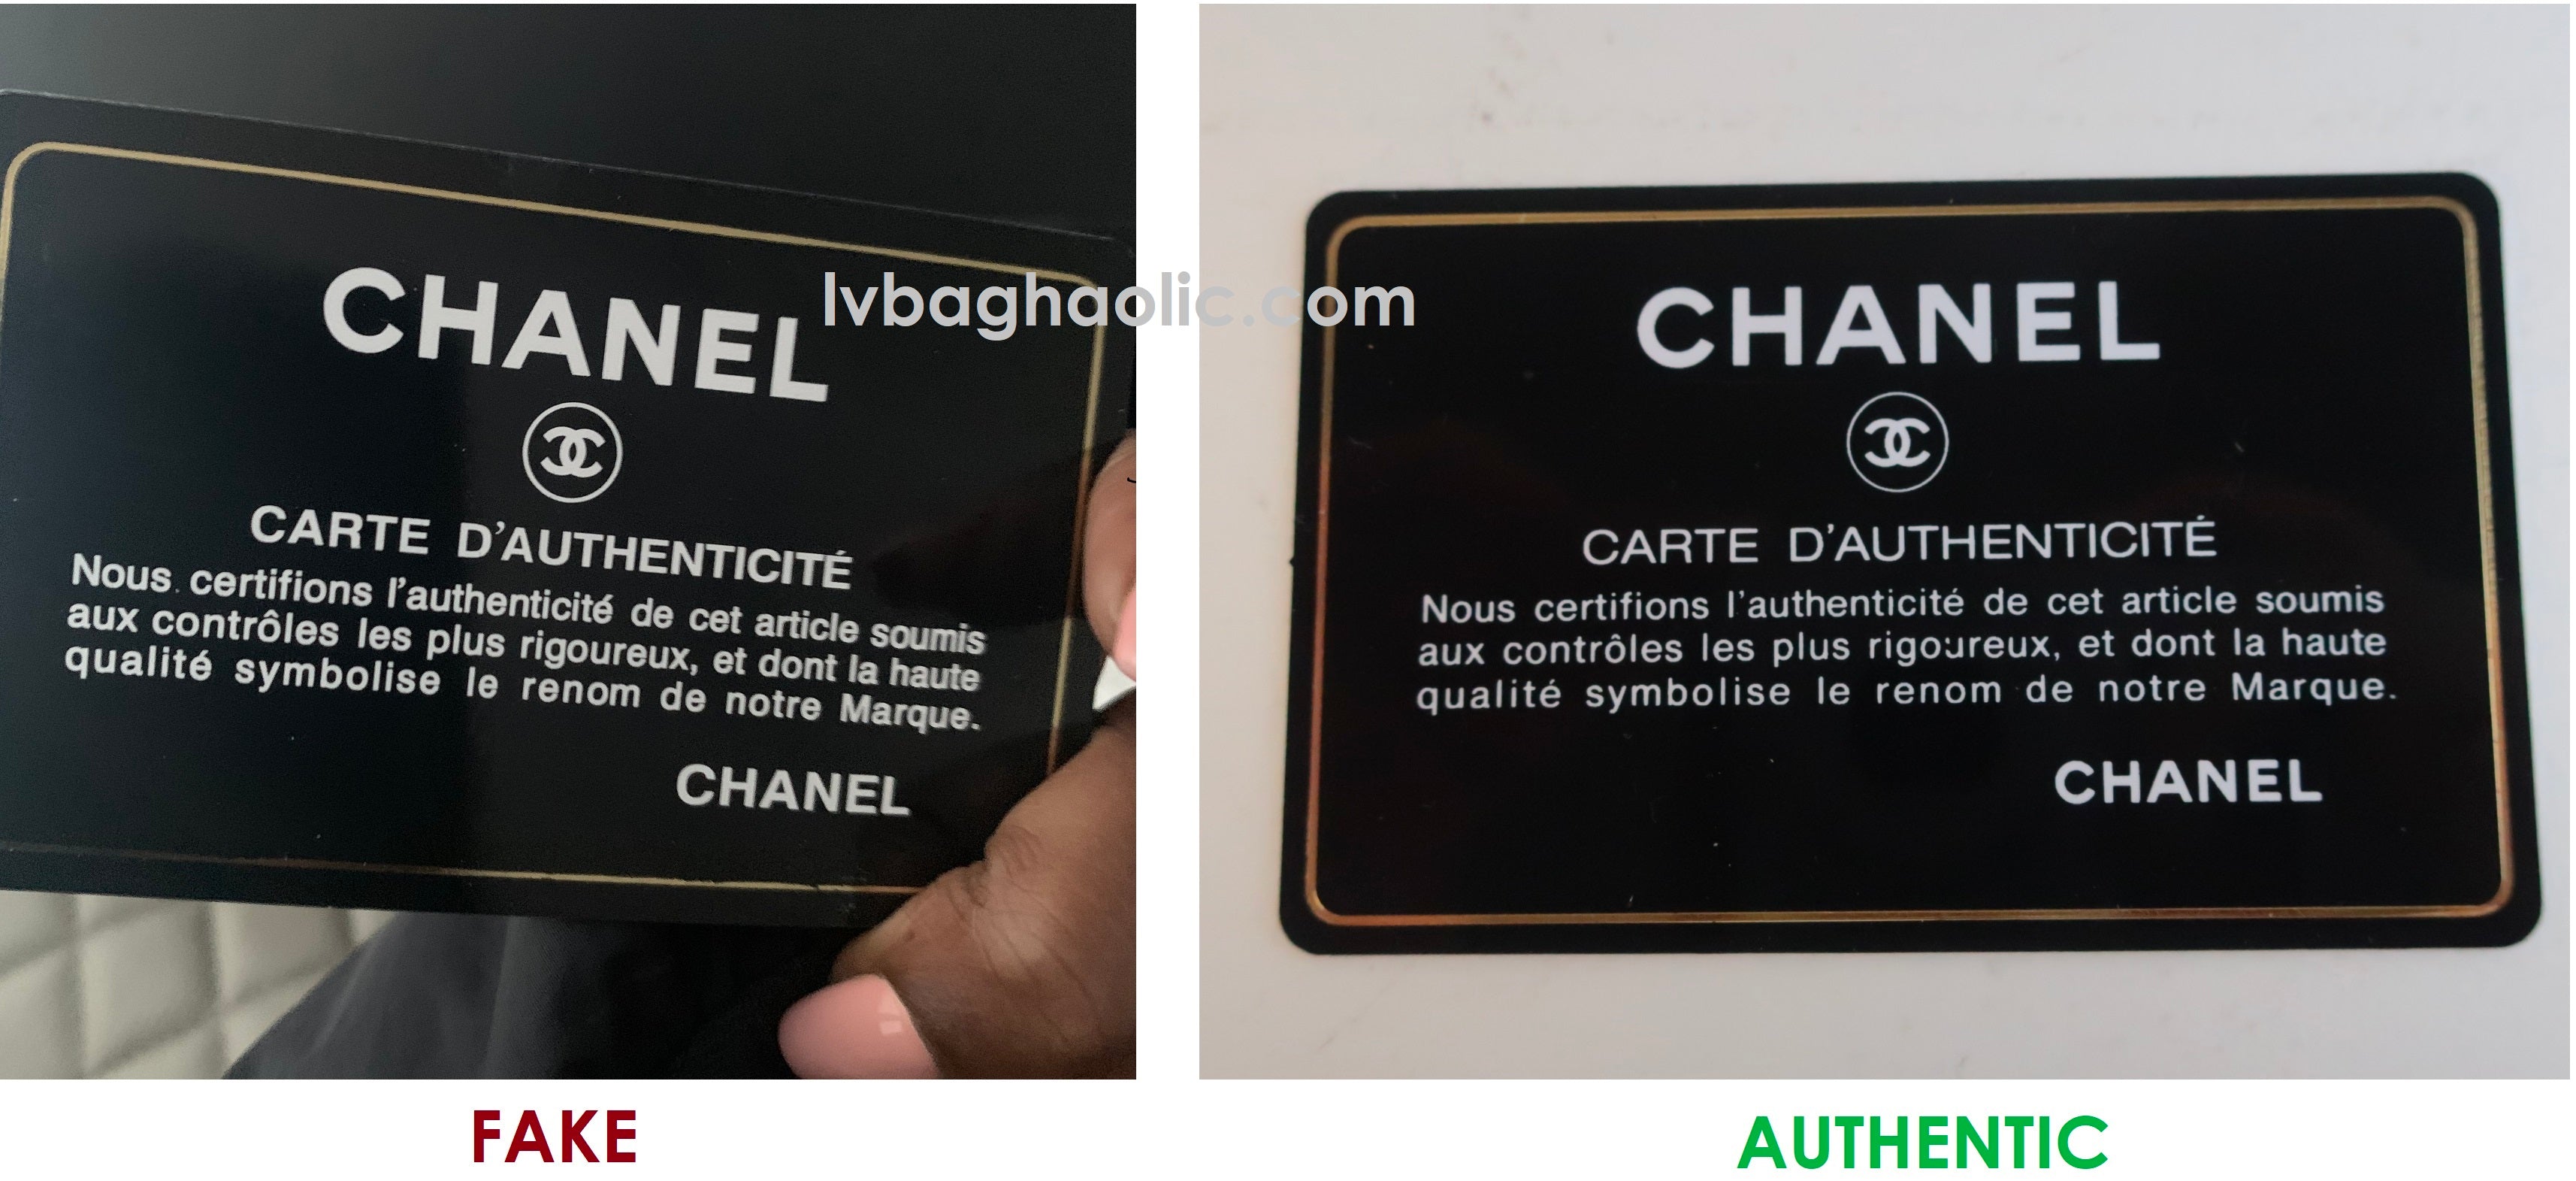 CHANEL GETTING RID OF AUTHENTICITY CARDS?!?! LET'S TALK! 